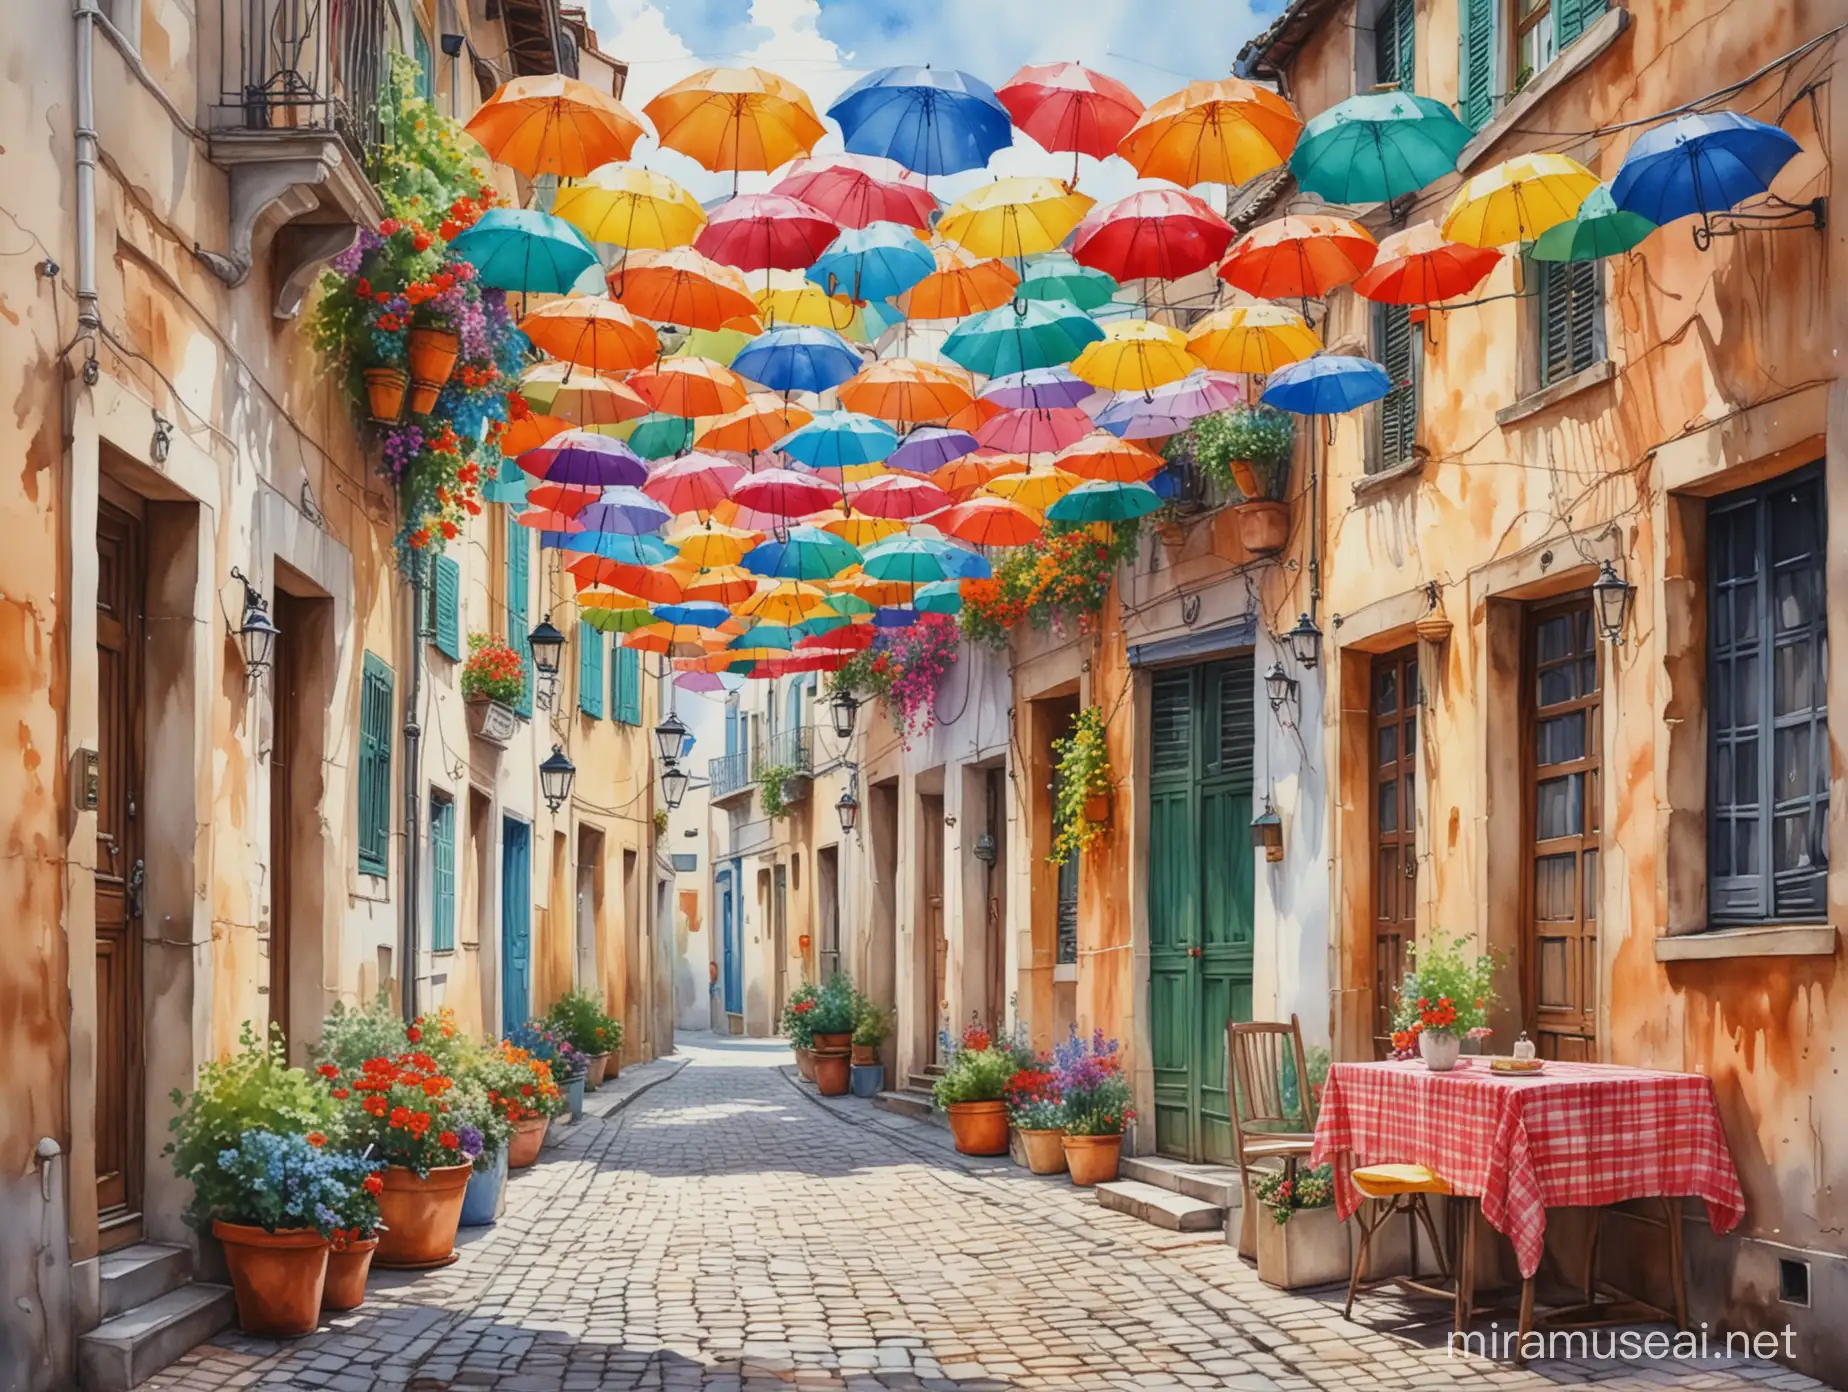  cobbled street, with old houses, colorful umbrellas hanging upside down forming a colorful ceiling. Vases with flowers on the doors of houses, tables with colorful tablecloths and chairs along the street. Watercolor, painting